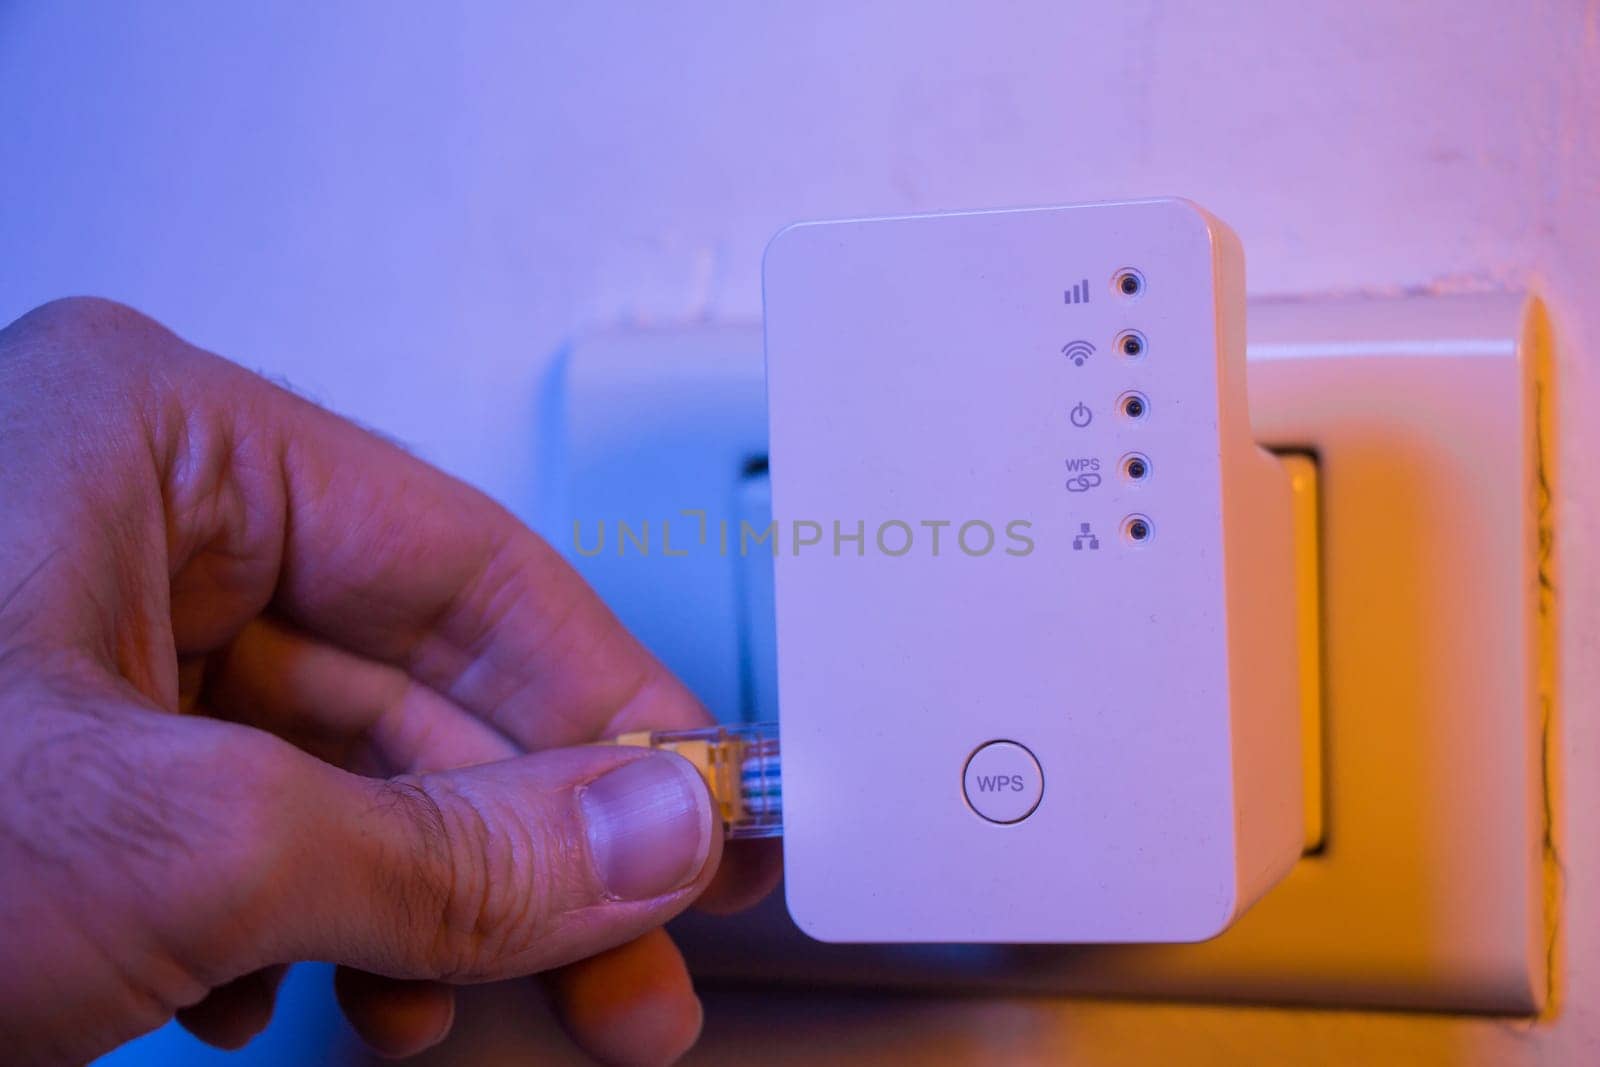 Man insert ethernet cable into WiFi extender device which is in electrical socket on the wall. The device is in access point mode that help to extend wireless network in home or office.